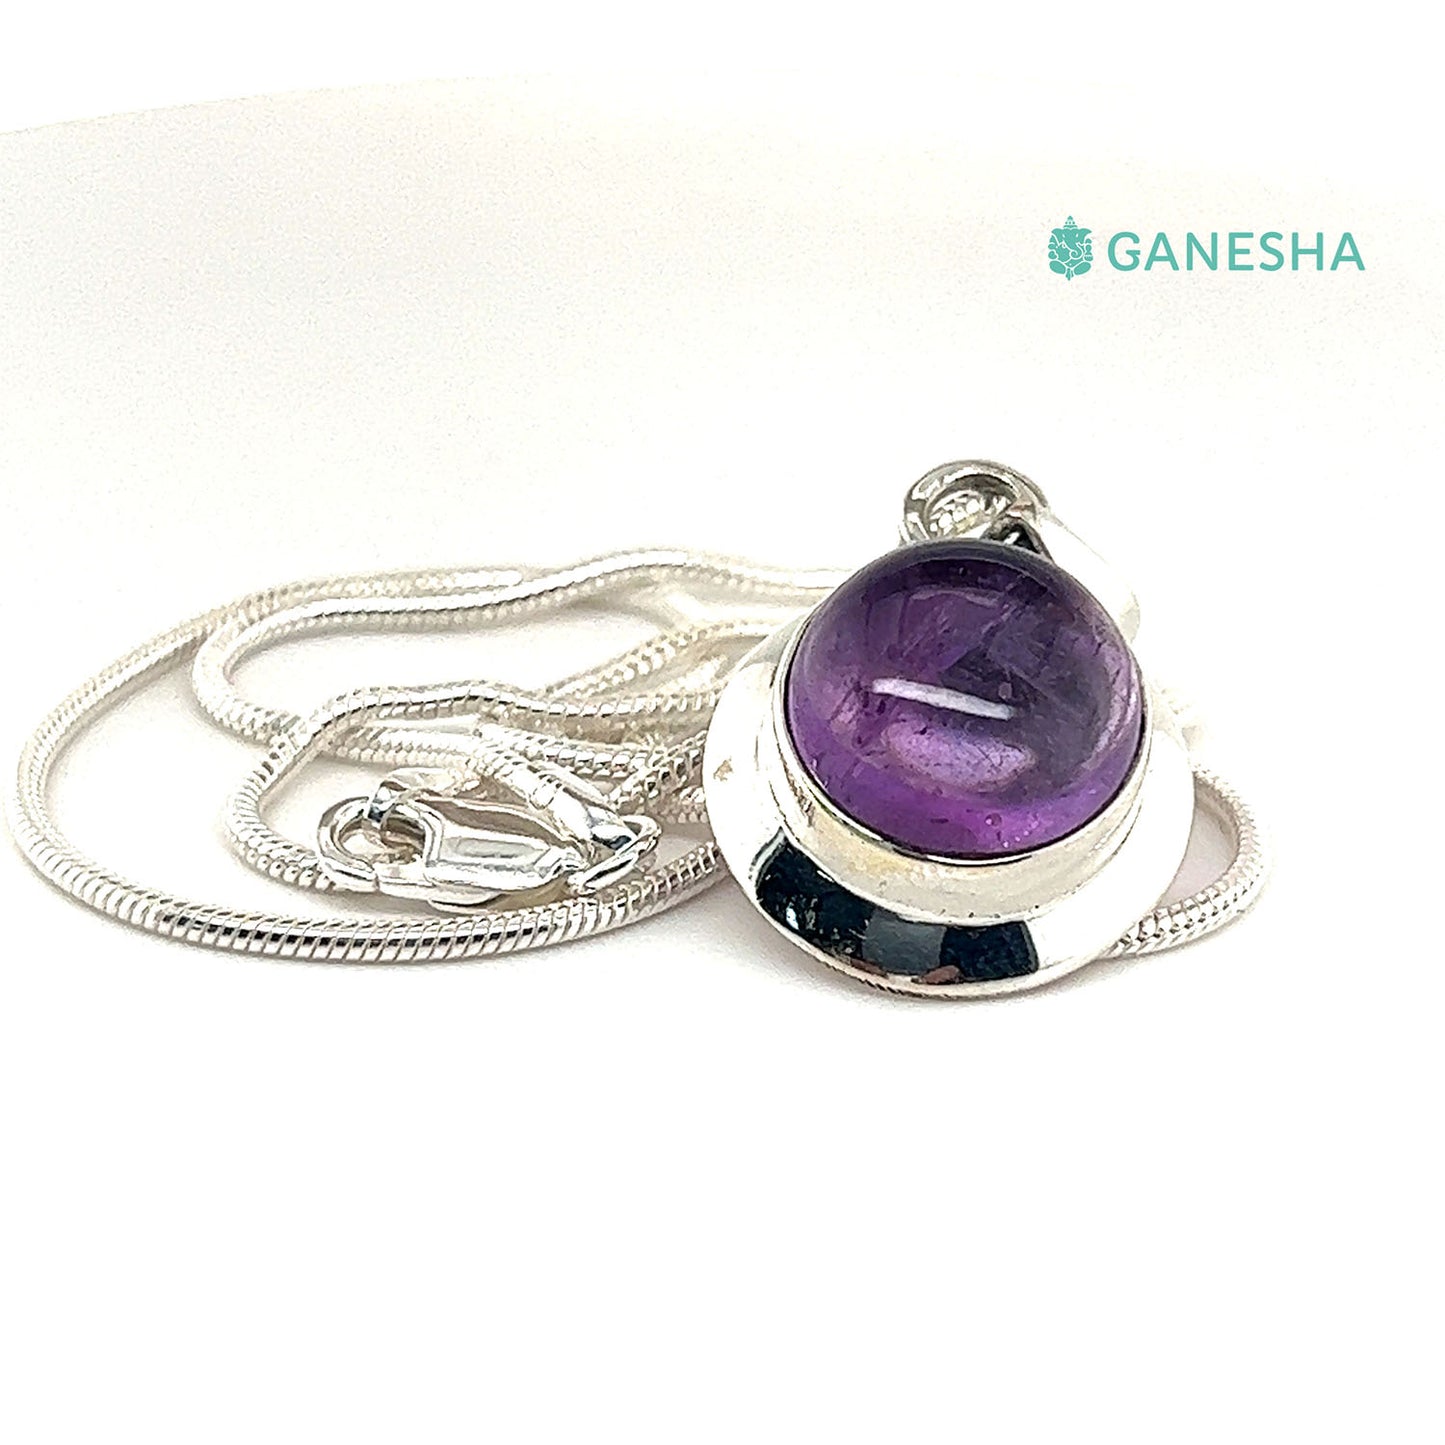 Amethyst Round Cabochons - 925 Sterling Silver Jewellery Gift Set With Free Chain, 925 Sterling Silver Jewellery Gift Set With Free Chain, Silver Jewellery Gift Set With Free Chain, Gift Set With Free Chain